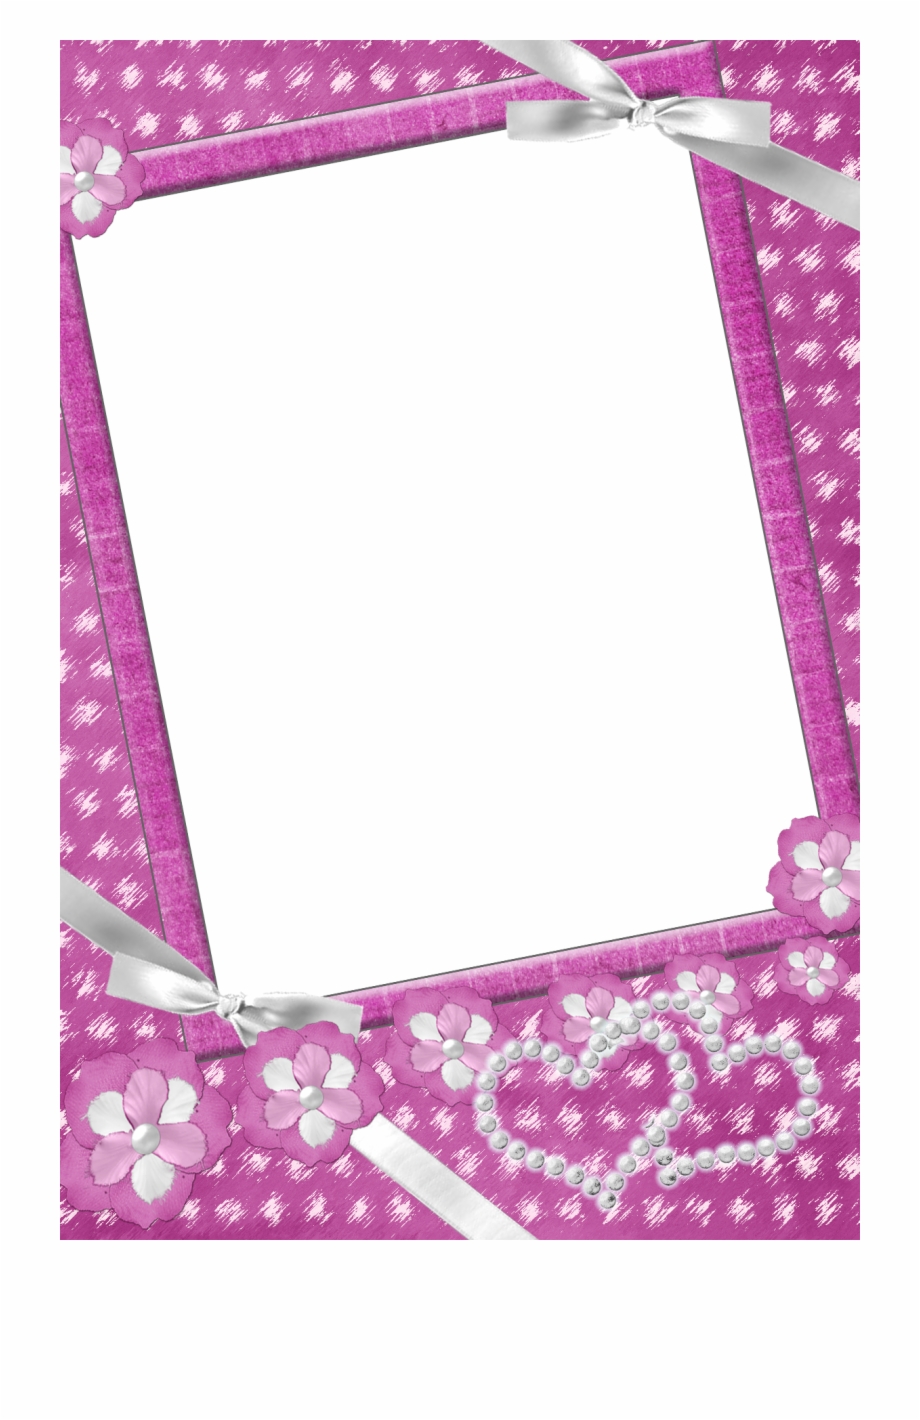 Frame With Flowers Romantic Frames